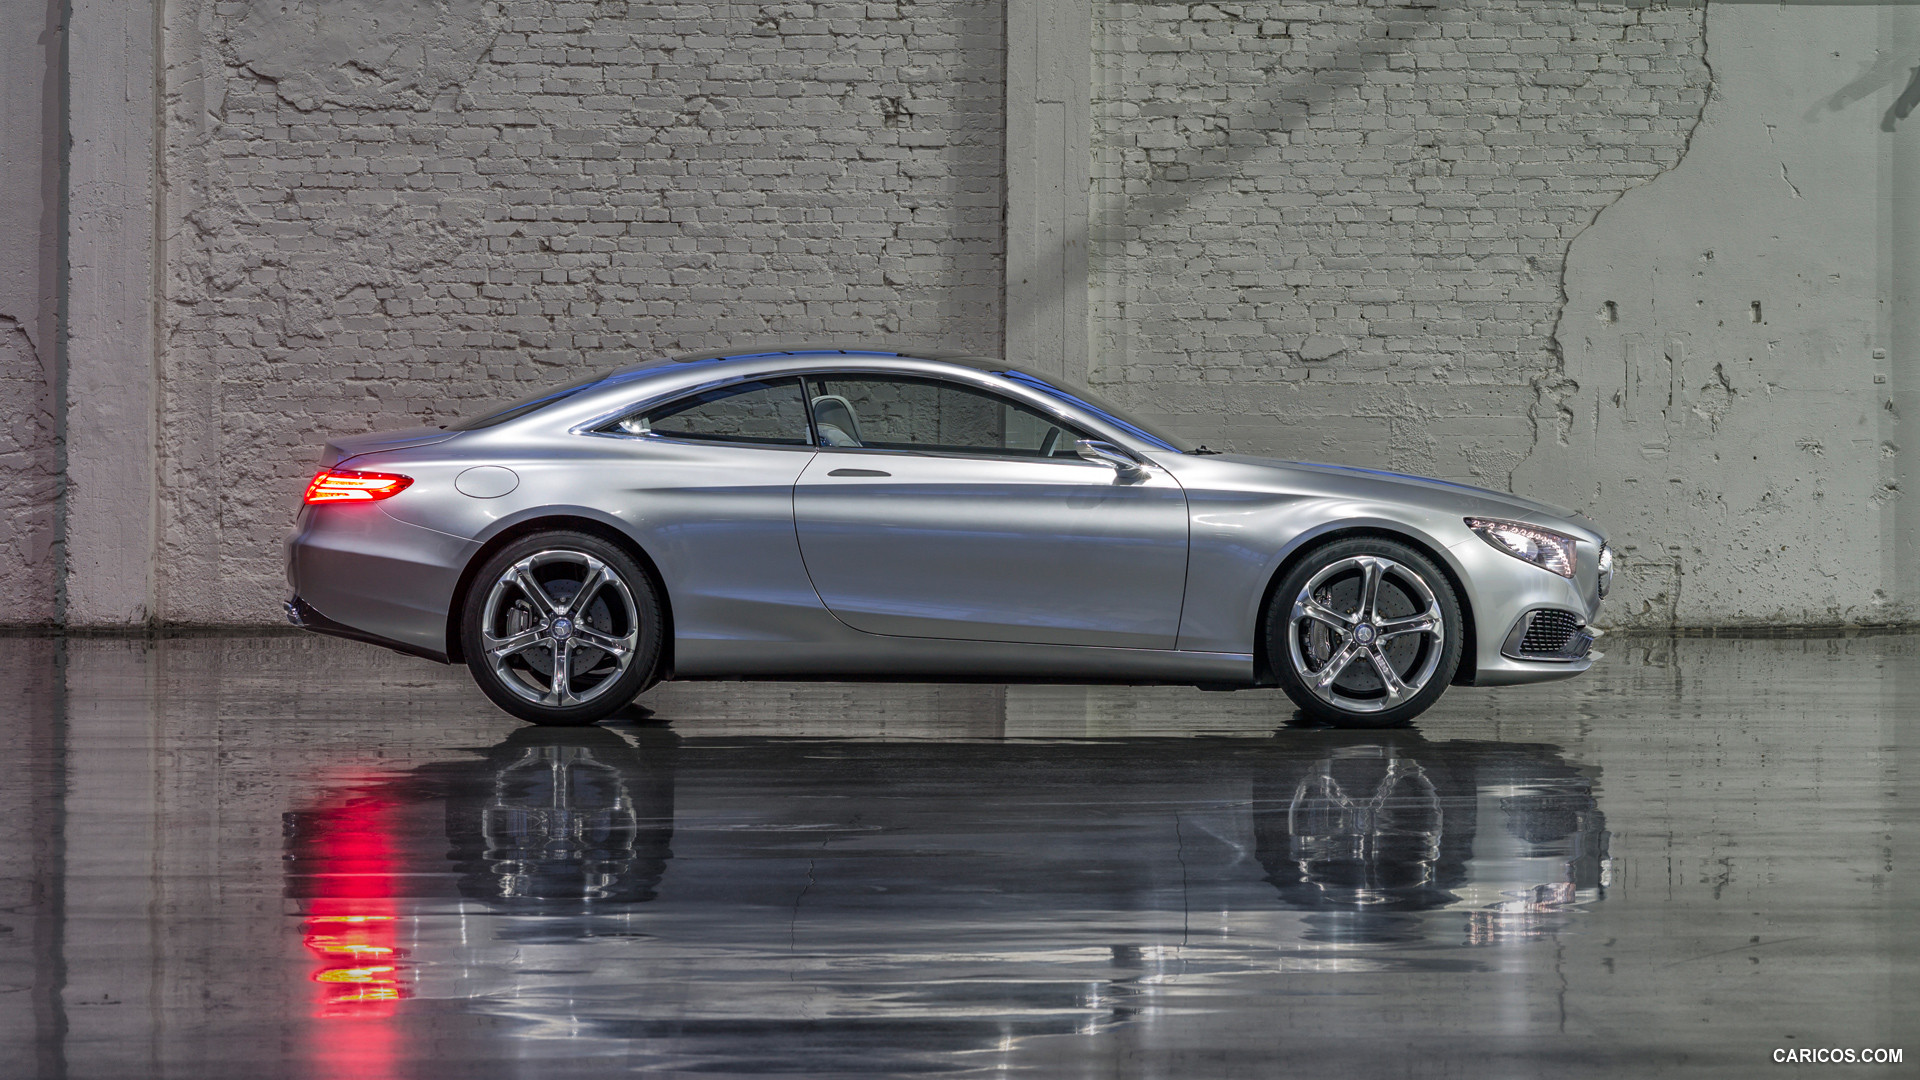 Mercedes-Benz S-Class Coupe Concept (2013)  - Side, #22 of 58